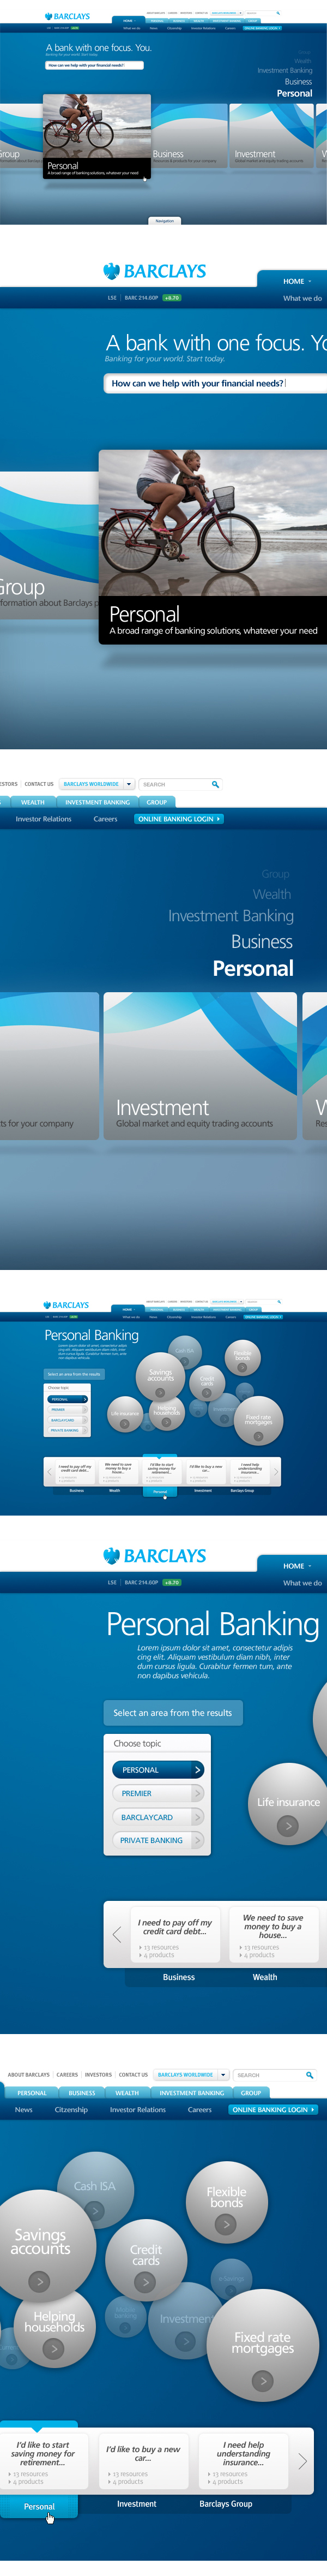 Barclays banking Financial Services corporate website